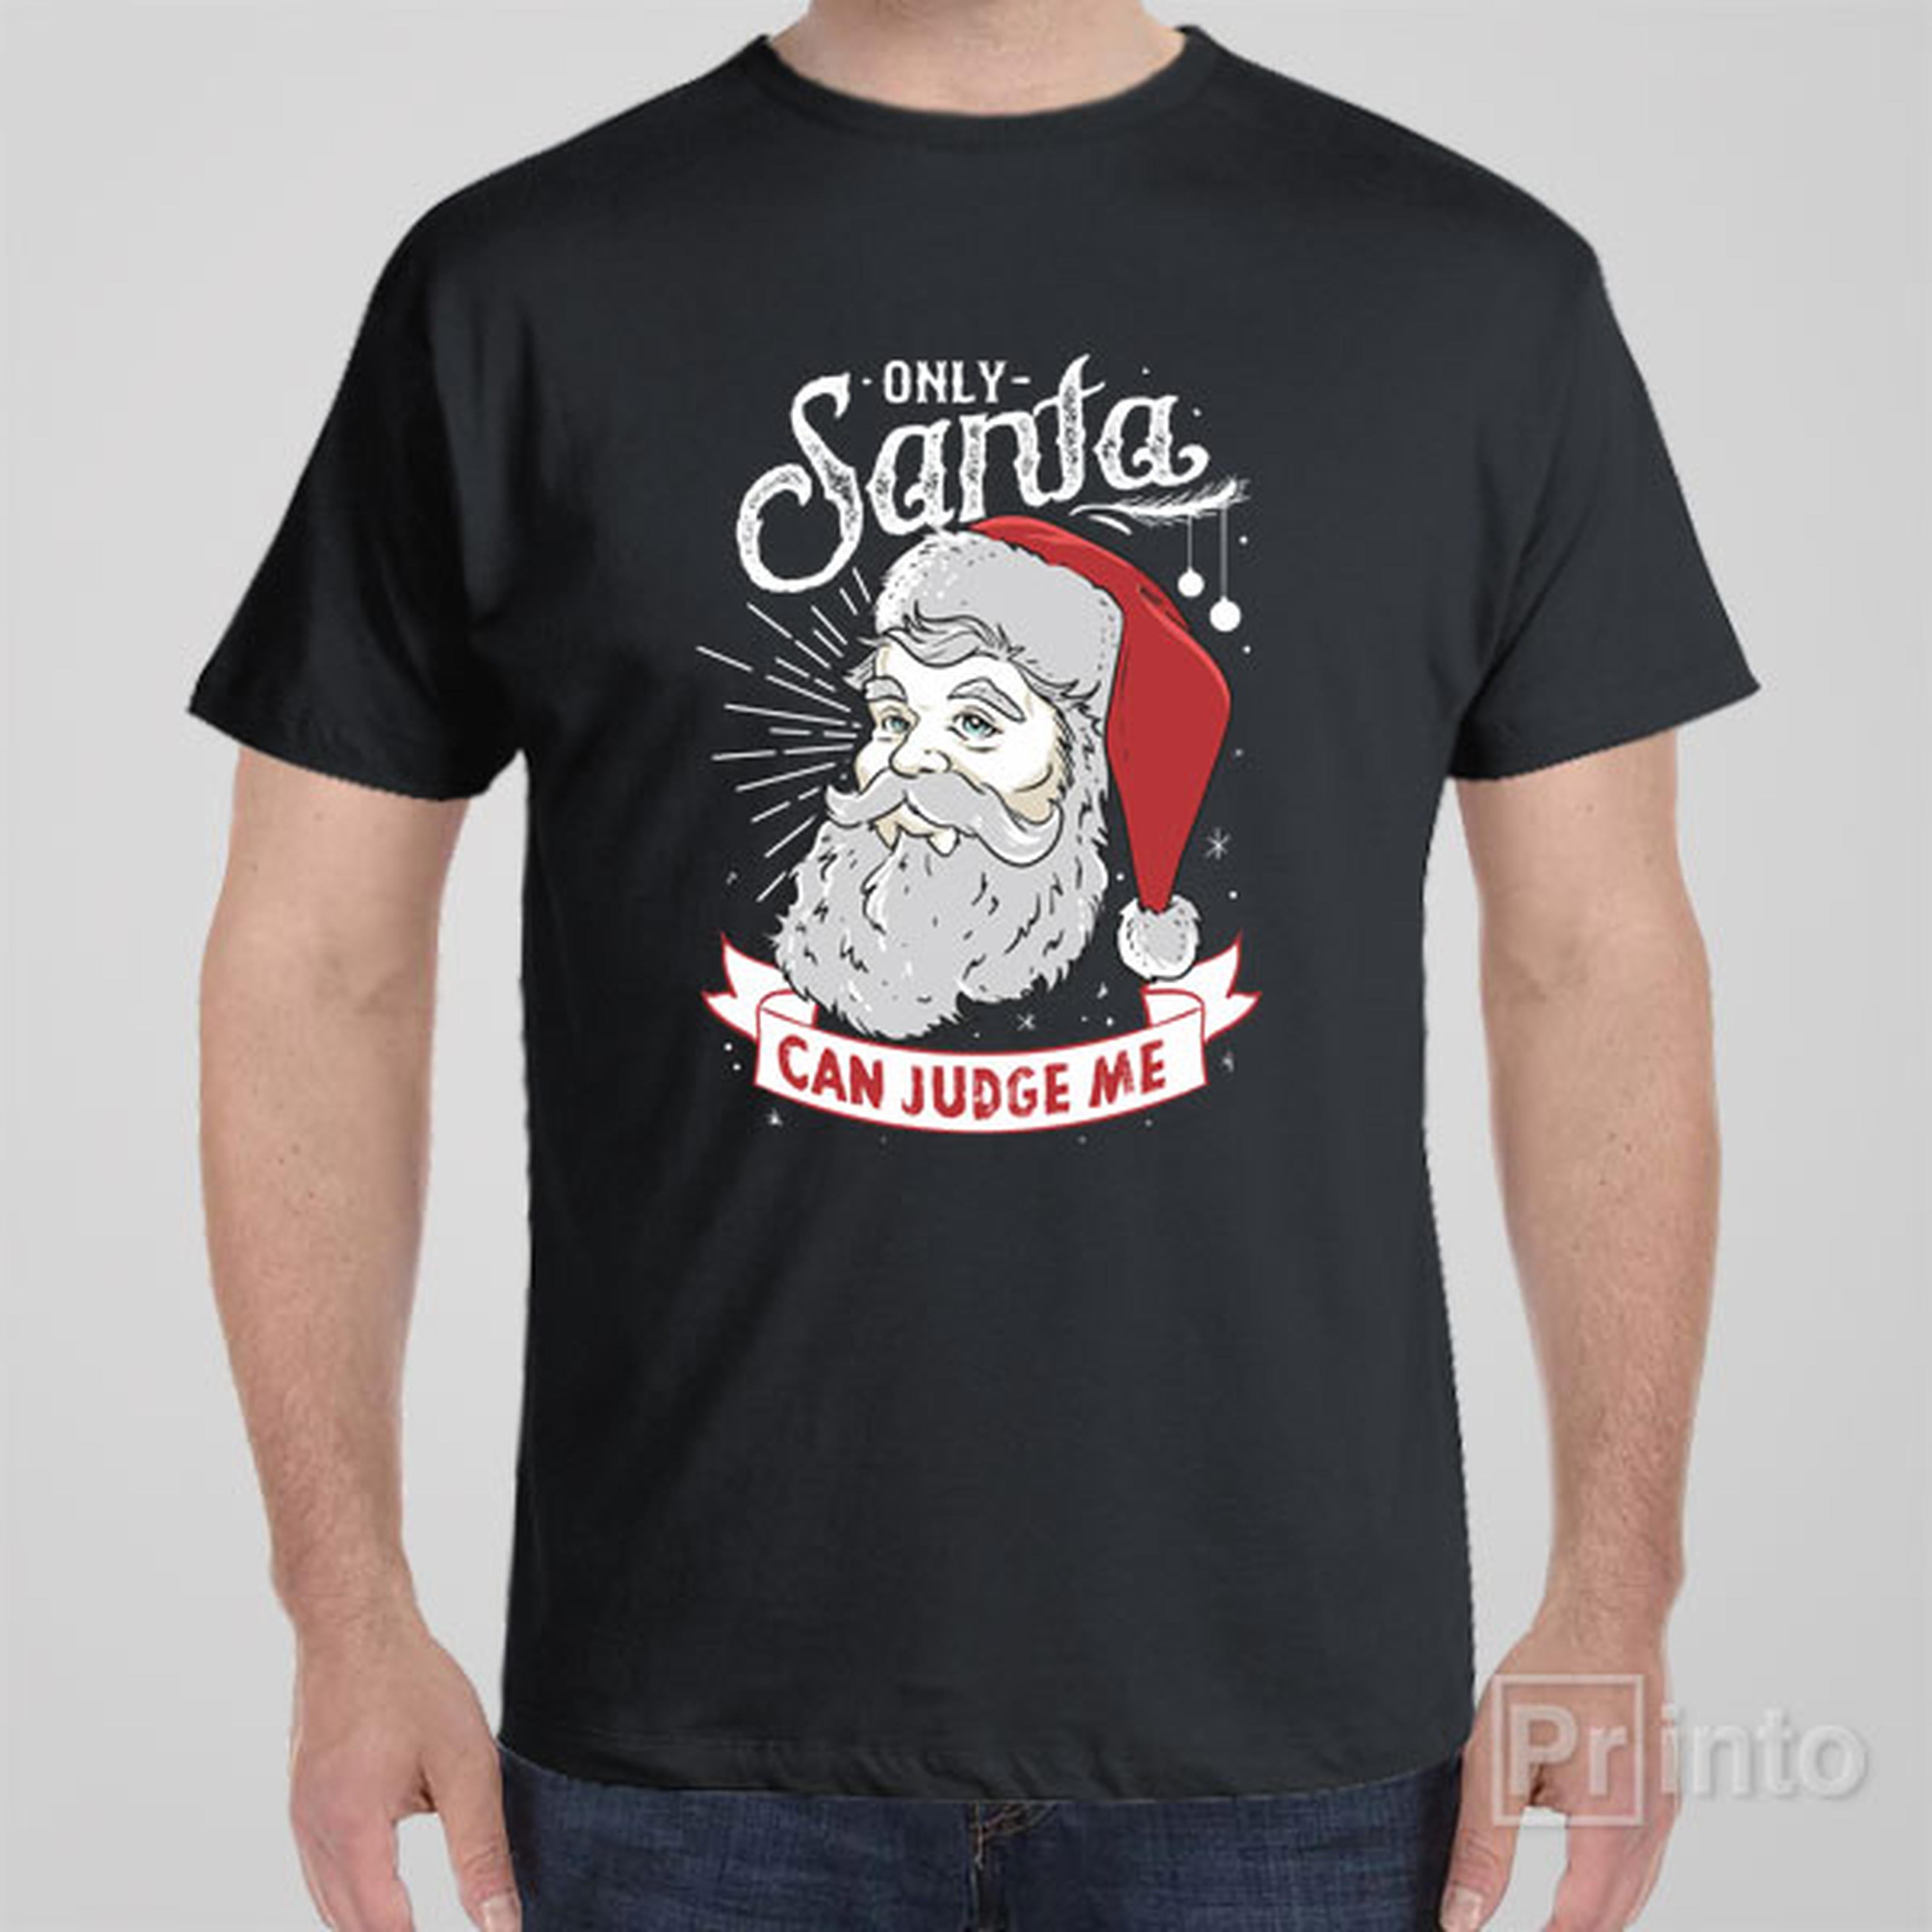 only-santa-can-judge-me-t-shirt